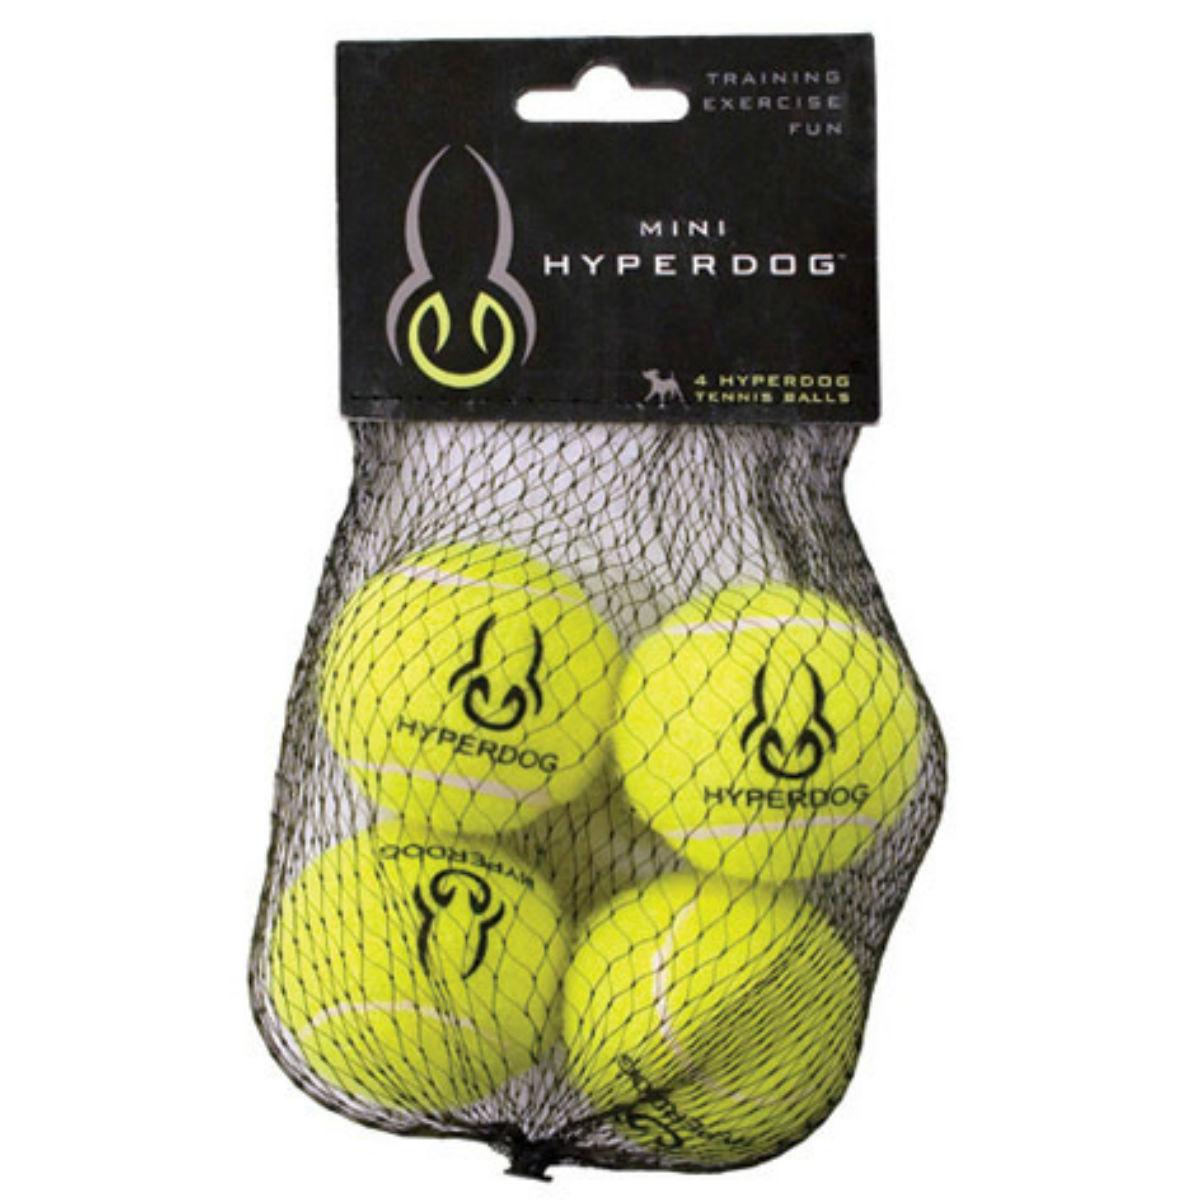 https://images.baxterboo.com/global/images/products/large/hyper-pet-dog-tennis-balls-yellow-green-6644.jpg